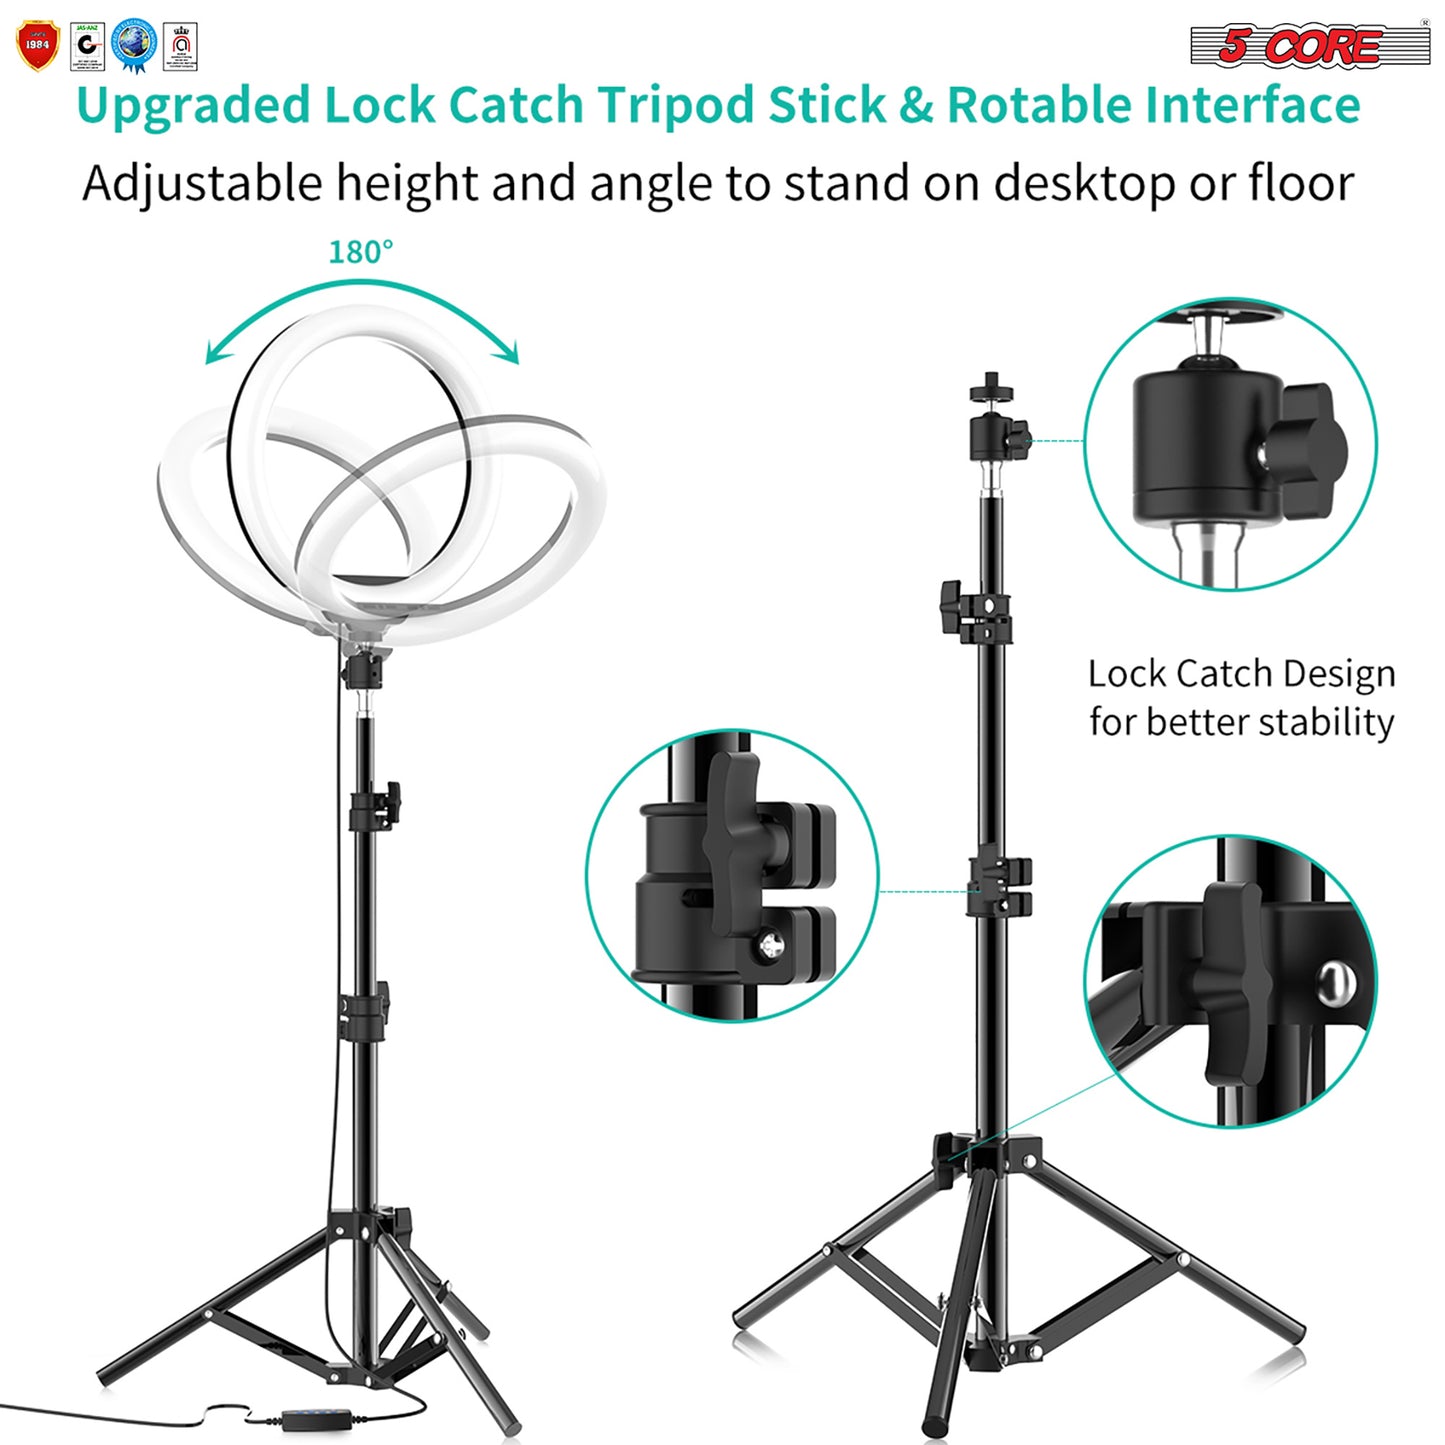 LED Ring Light with Tripod Stand and Phone Holder